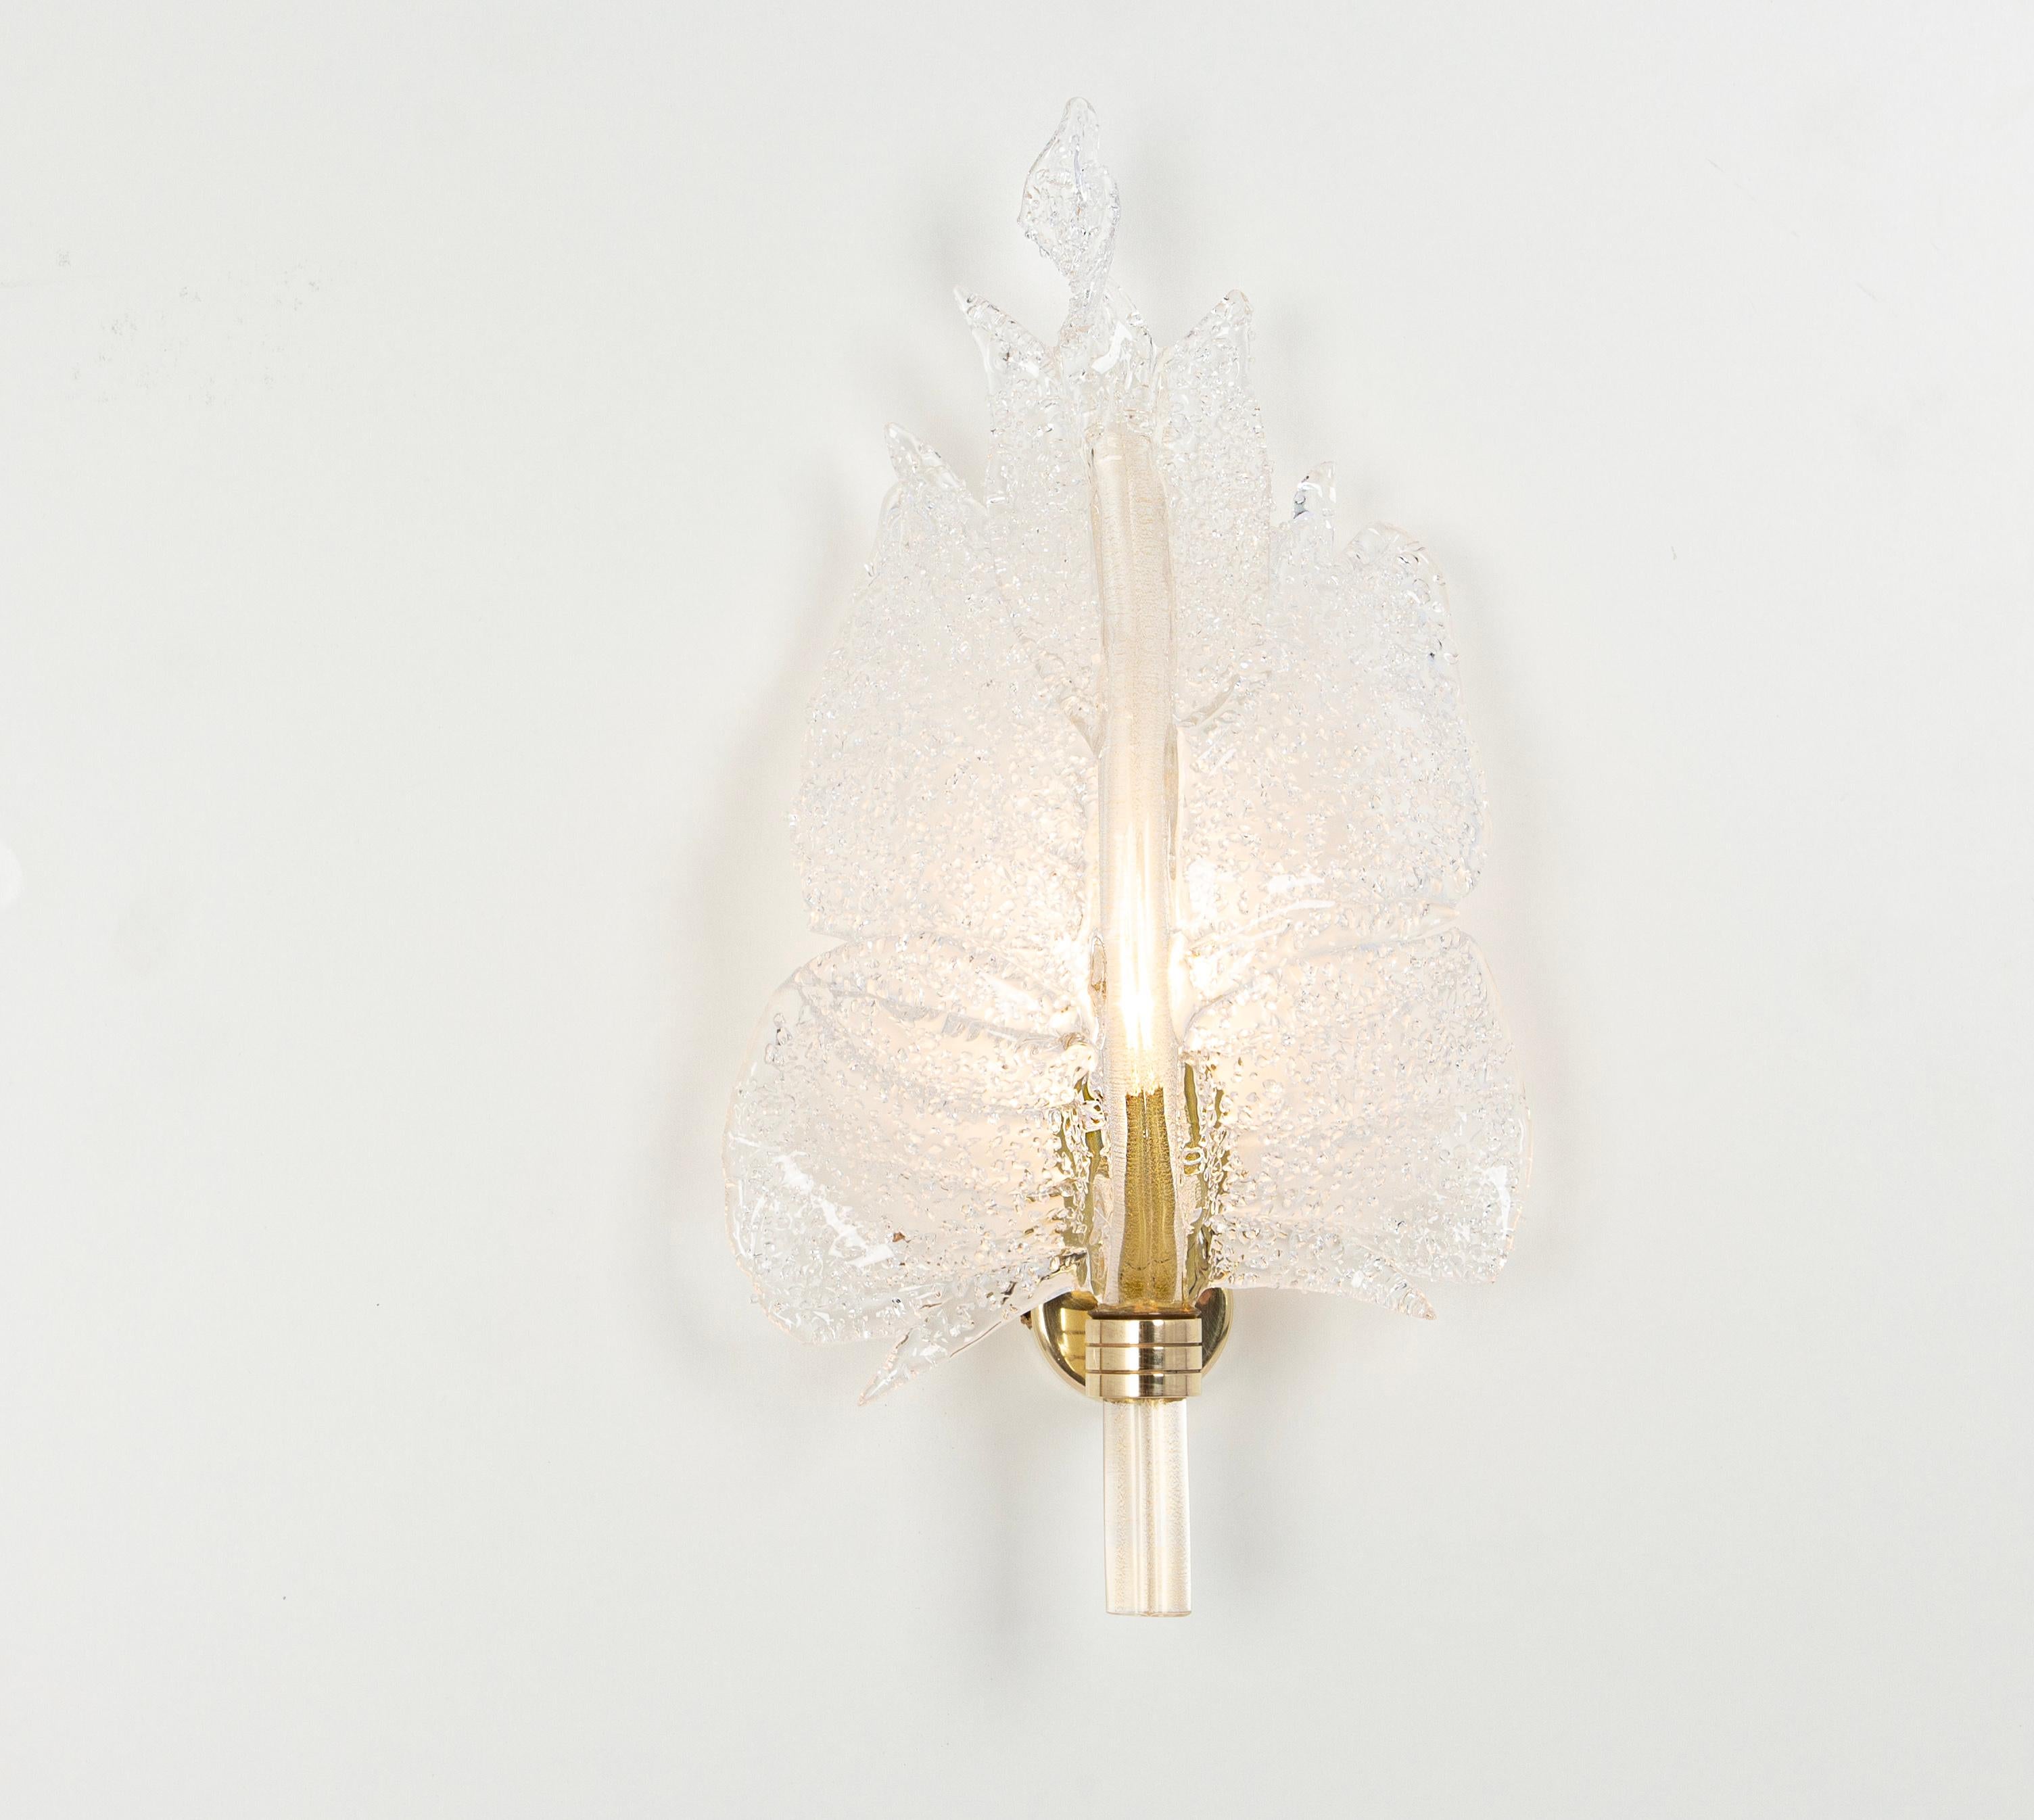 German Pair of Large Murano Glass Wall Sconce by Barovier & Toso, Italy, 1970s For Sale